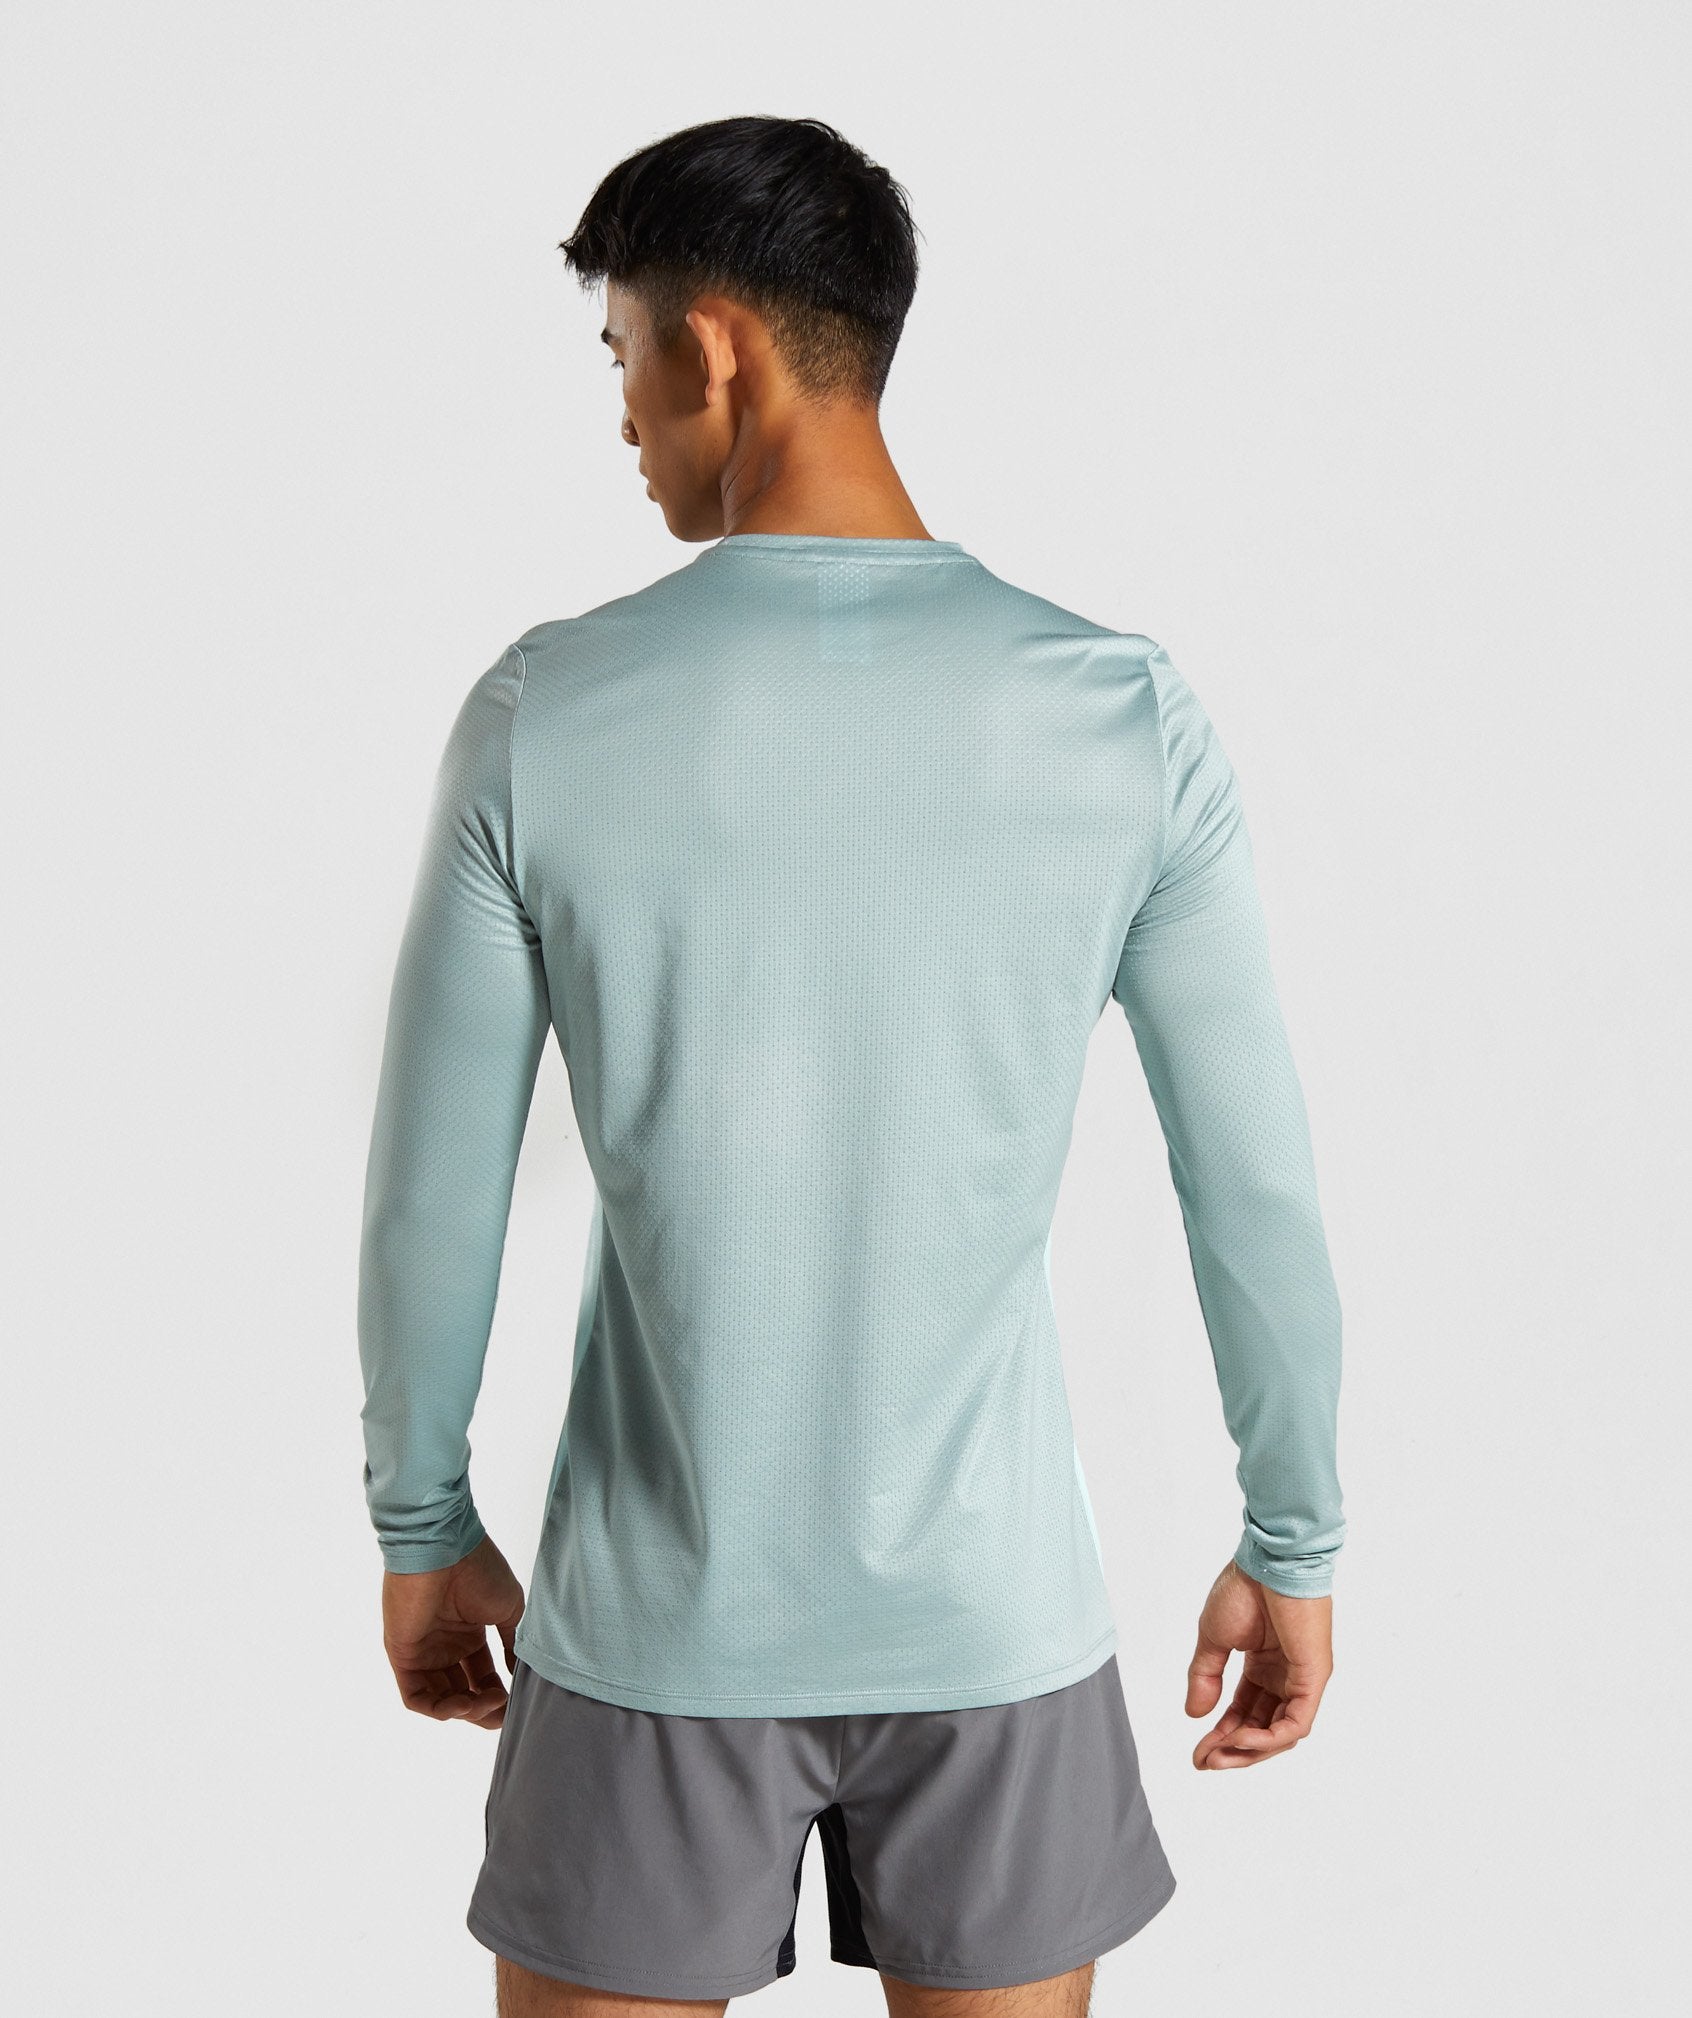 Speed Long Sleeve T-Shirt in Turquoise - view 2